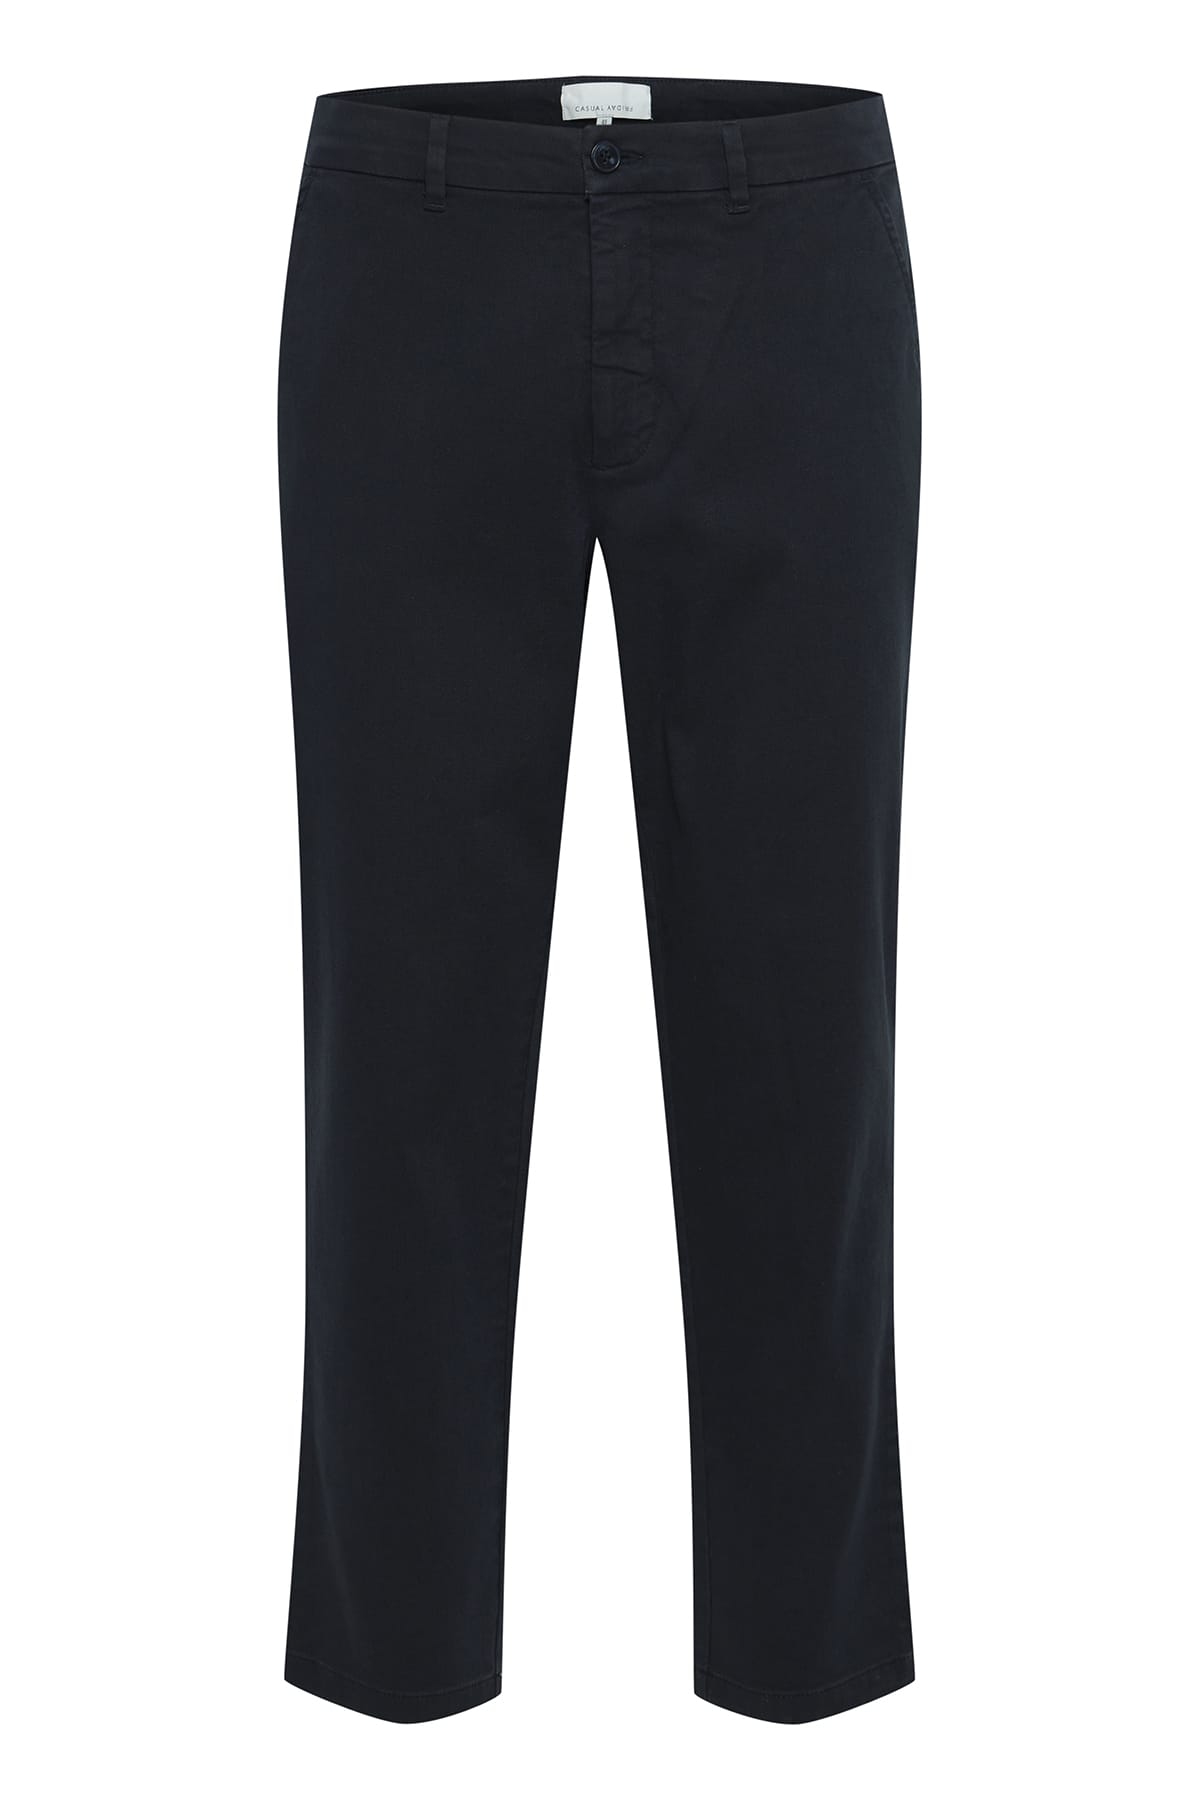 Hose Pepe relaxed pants Dark Navy Hose Casual Friday 